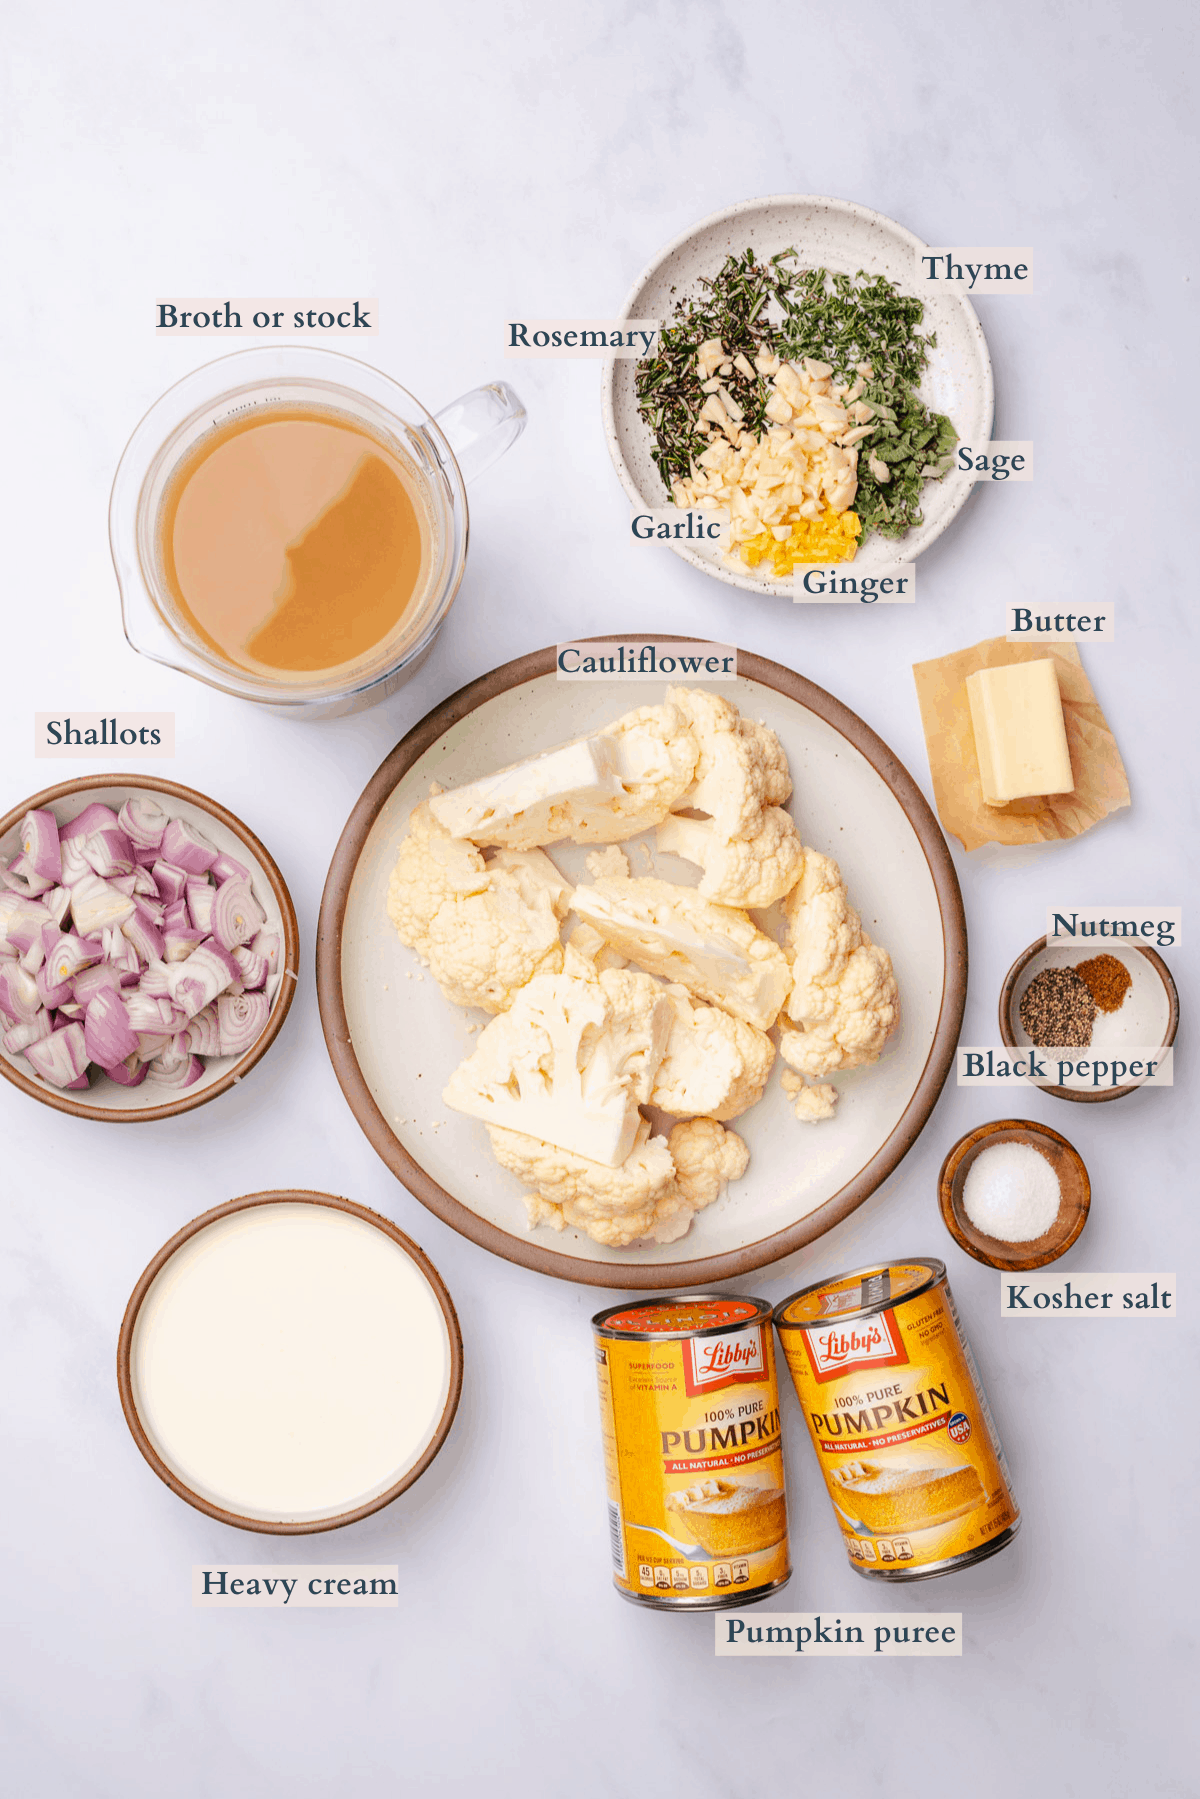 cauliflower and pumpkin soup recipe ingredients graphic with text to denote different ingredients